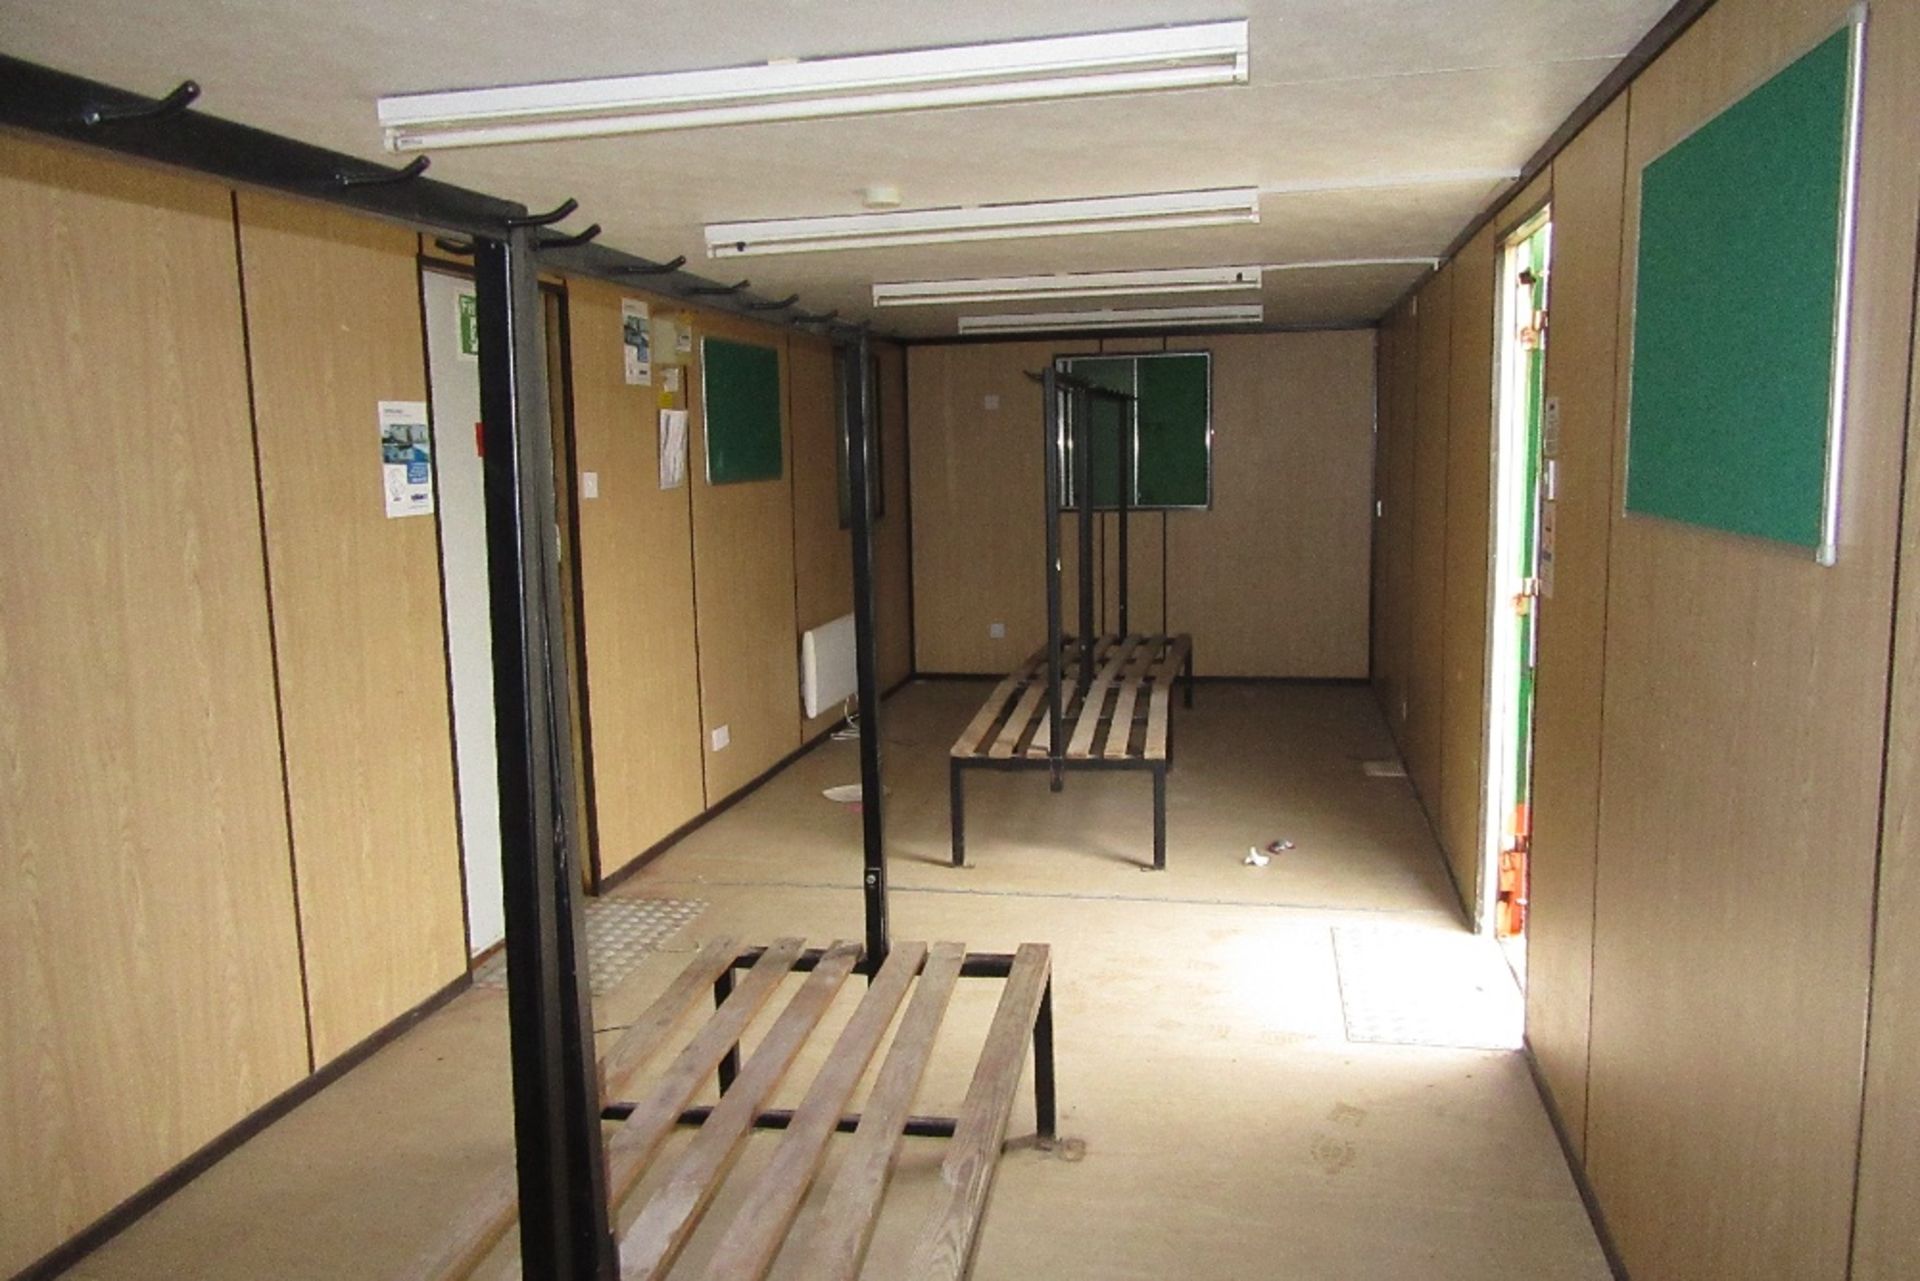 E52143 32ft x 10ft Anti Vandal Changing Room - Image 4 of 6